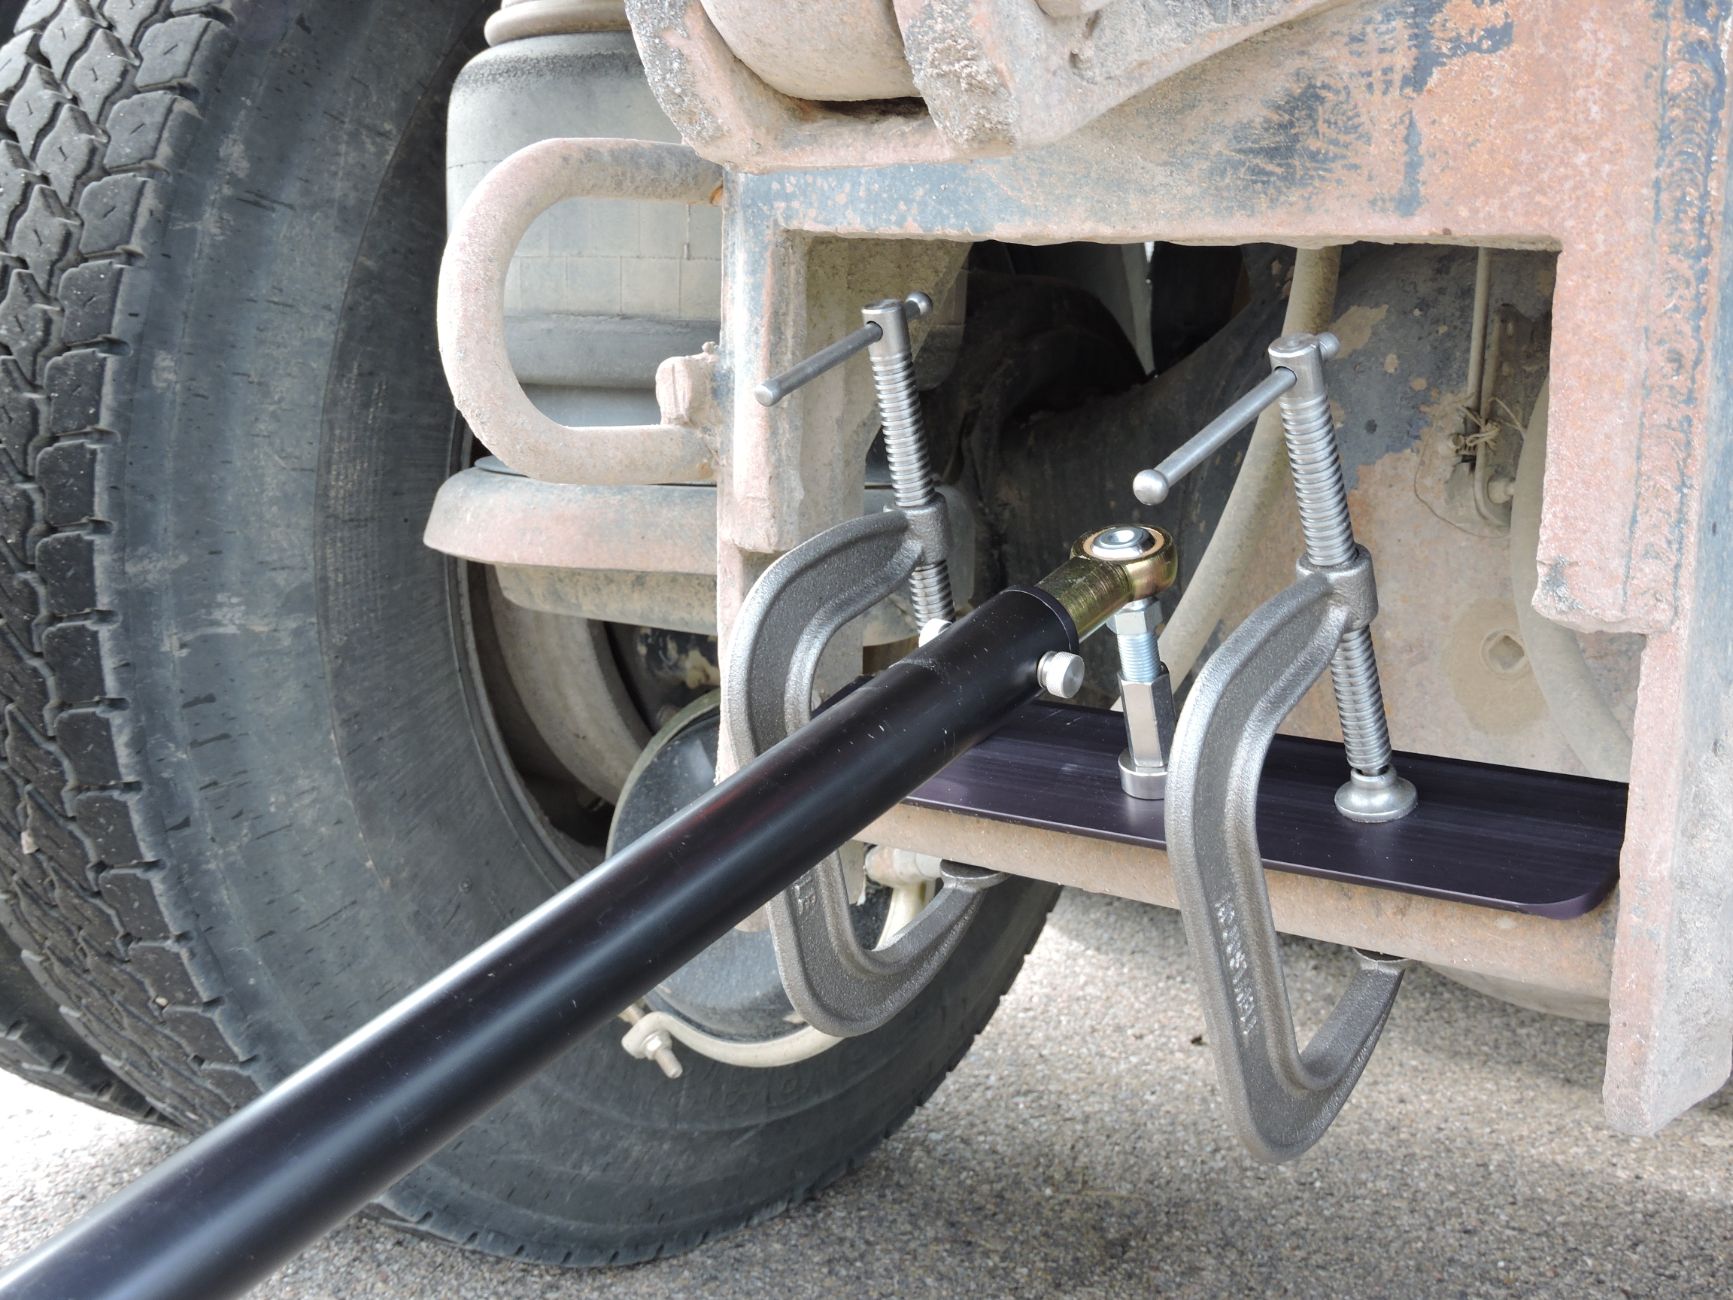 BDI Automatic Load Position Tracker (ALPT) clamped to vehicle